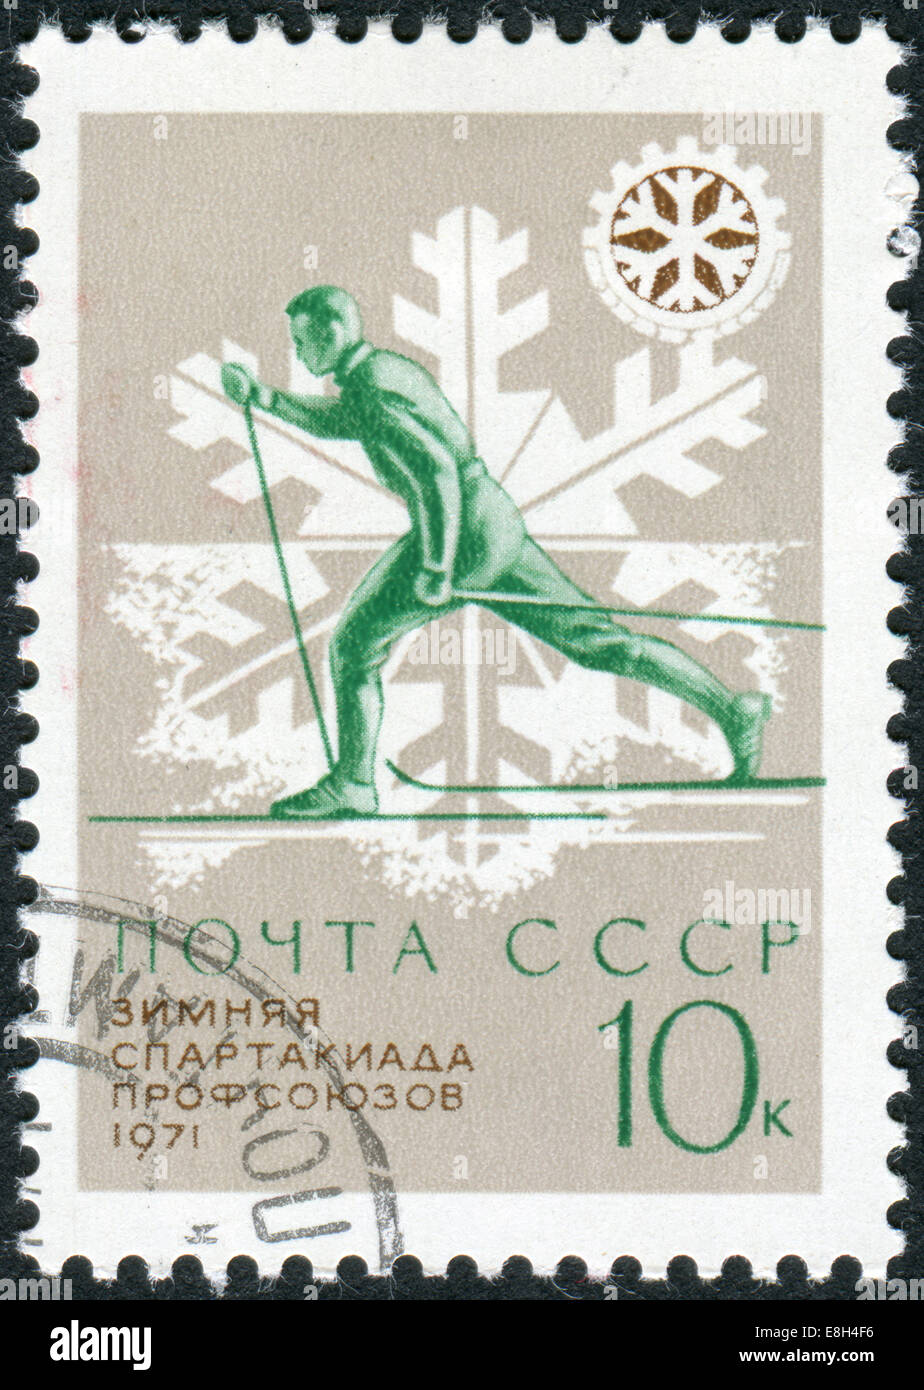 USSR - CIRCA 1970: Postage stamp printed in USSR, devoted to the Trade Union Winter Games (Spartakiada), shows skier, circa 1970 Stock Photo